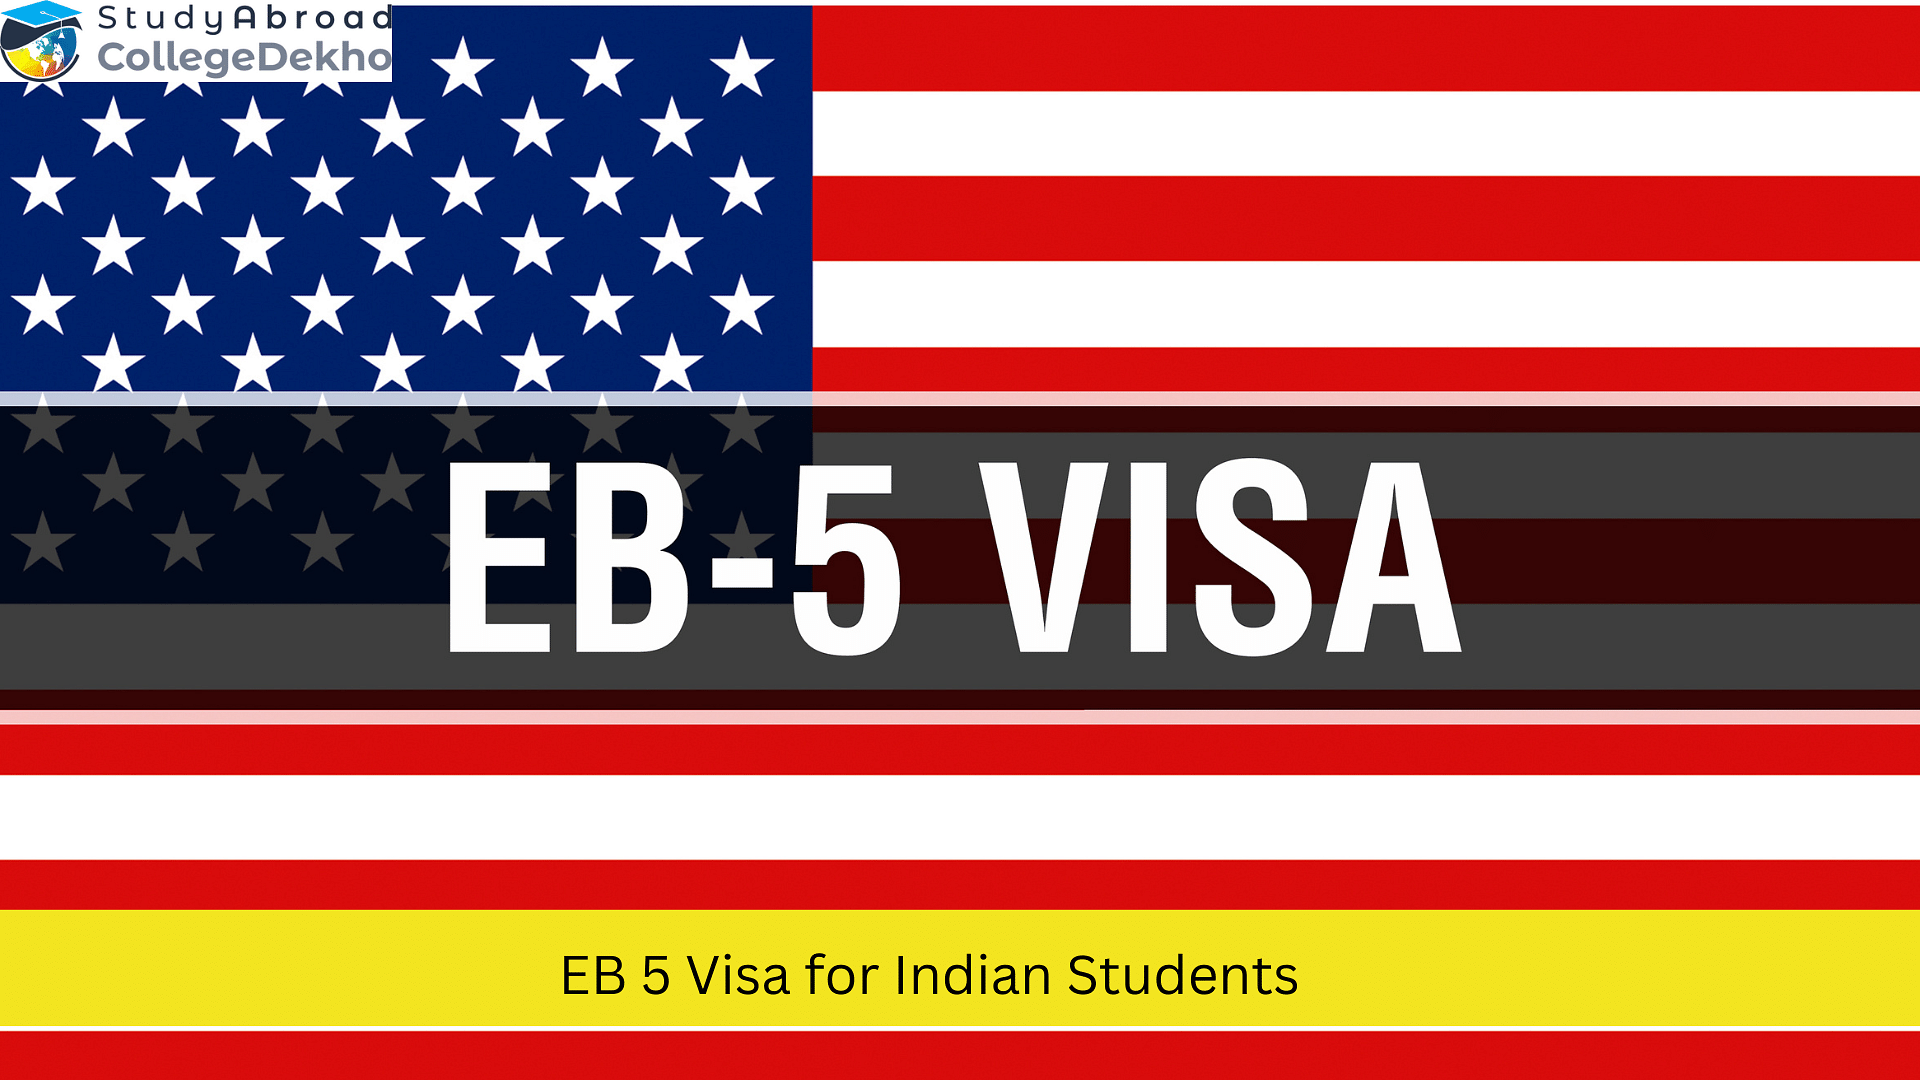 EB 5 Visa for Indian Students